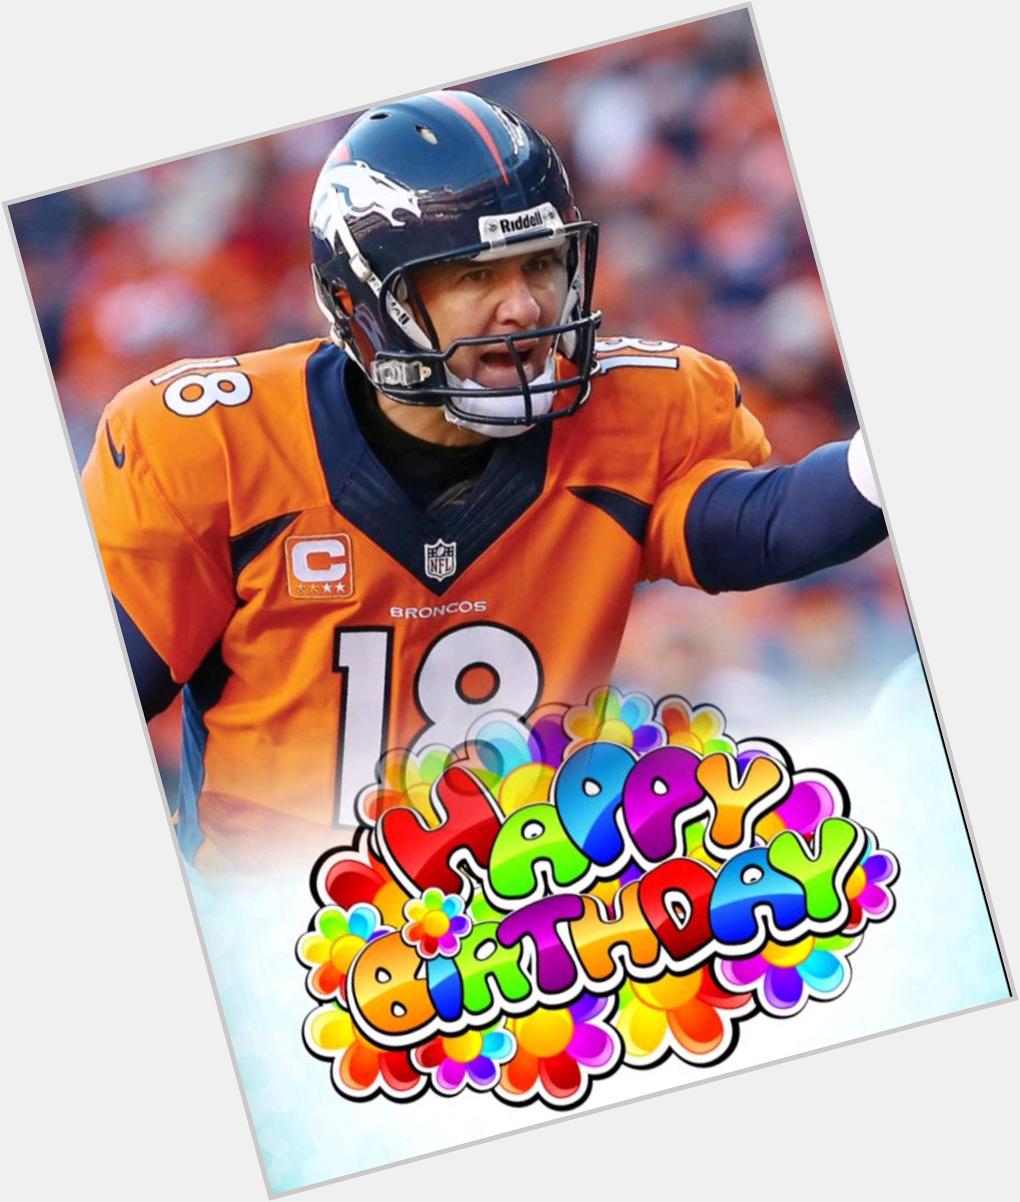 Happy Birthday to Peyton Manning! We hope him the best in one of his last seasons as a future HOF quarterback. 